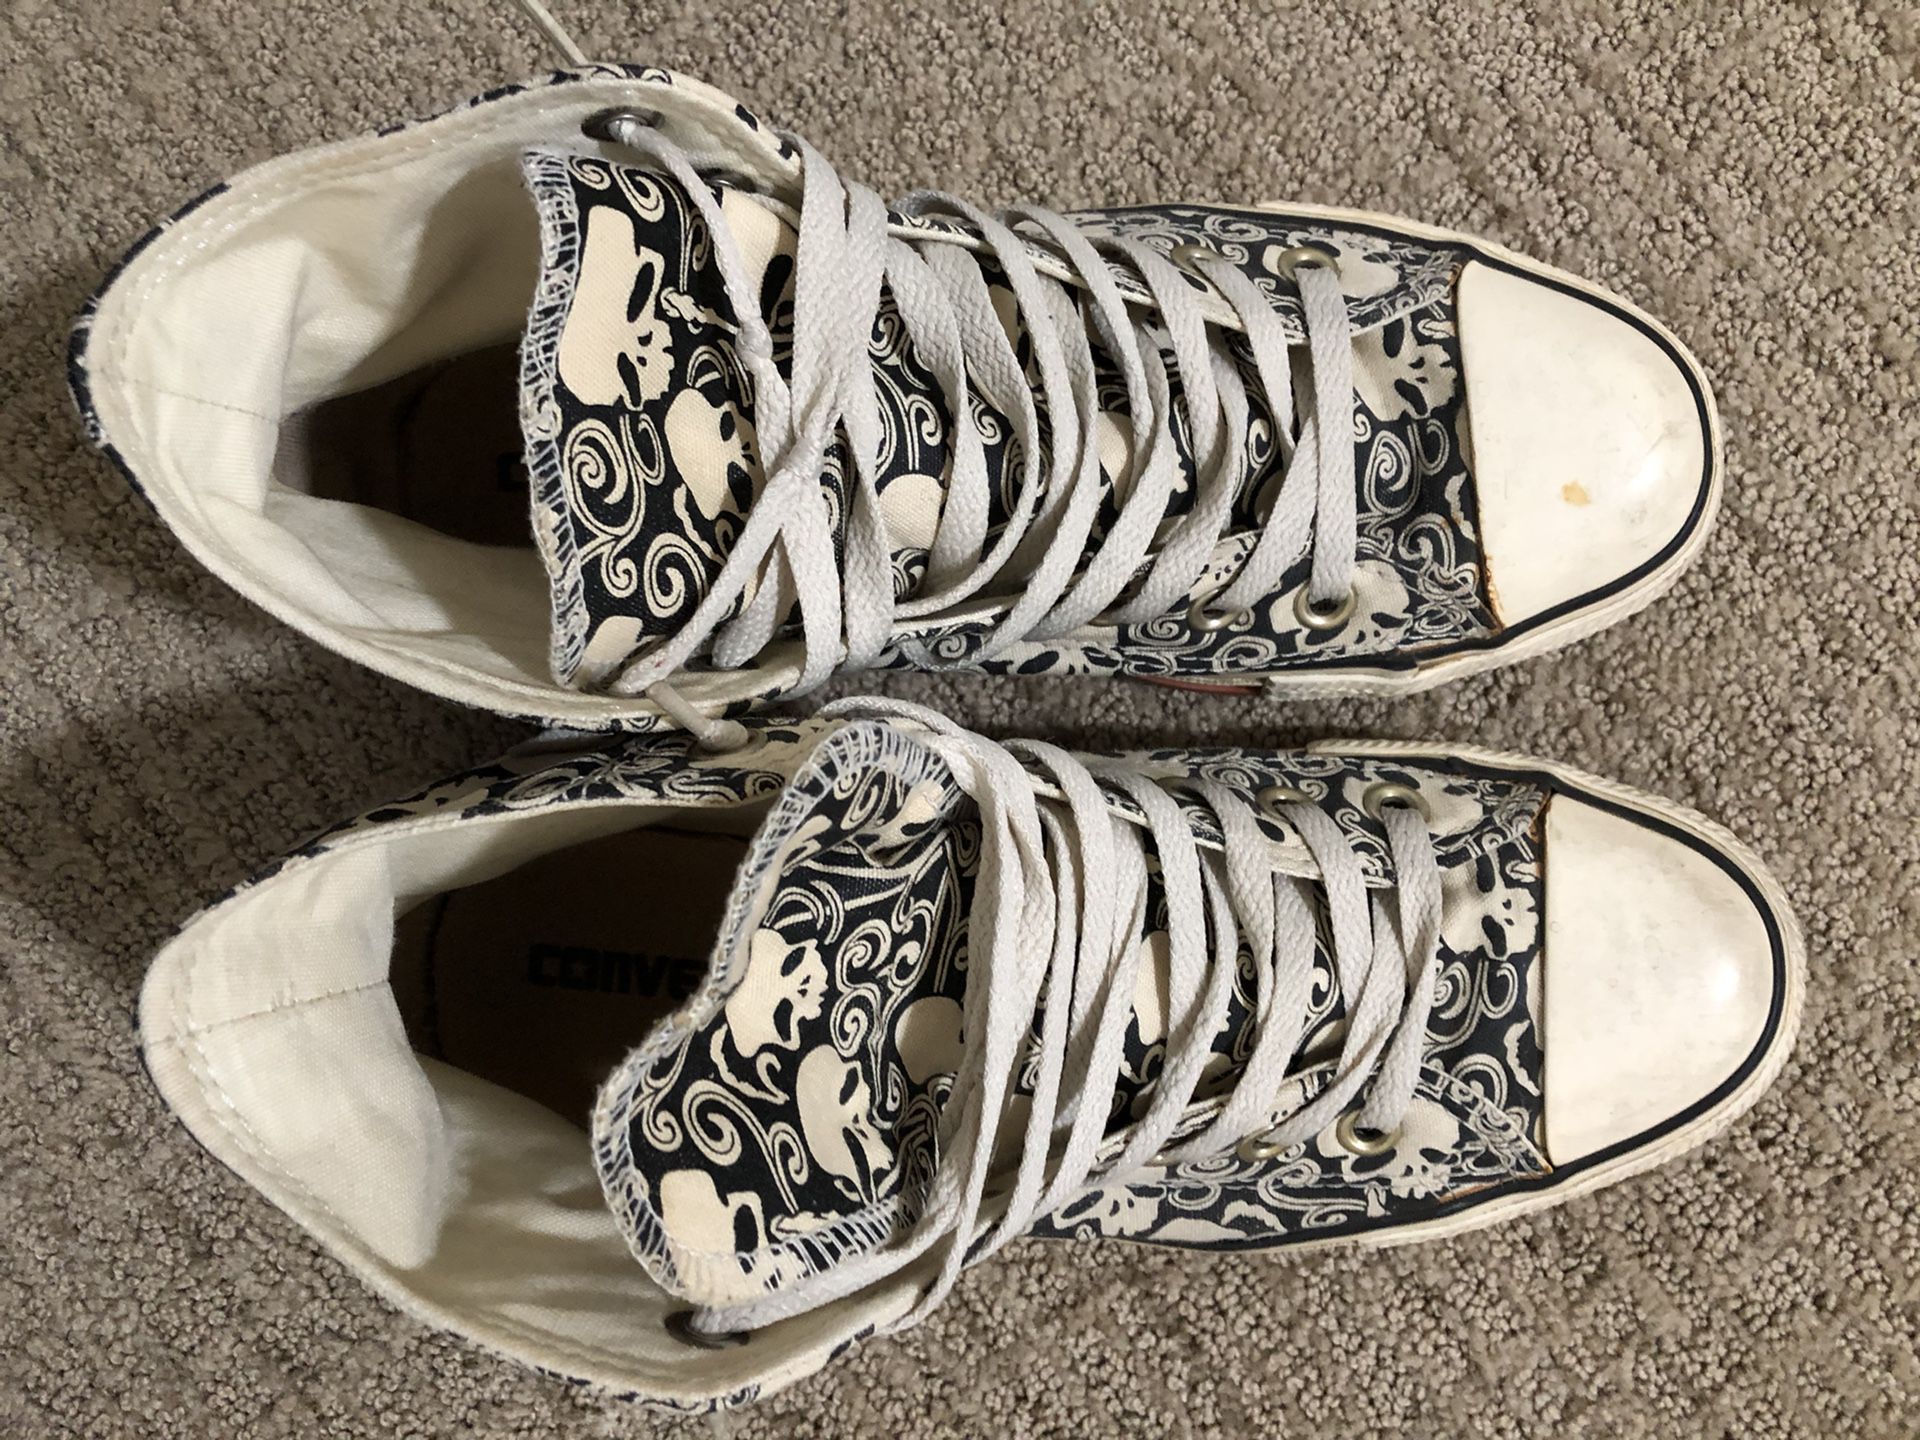 Converse All Star with skulls